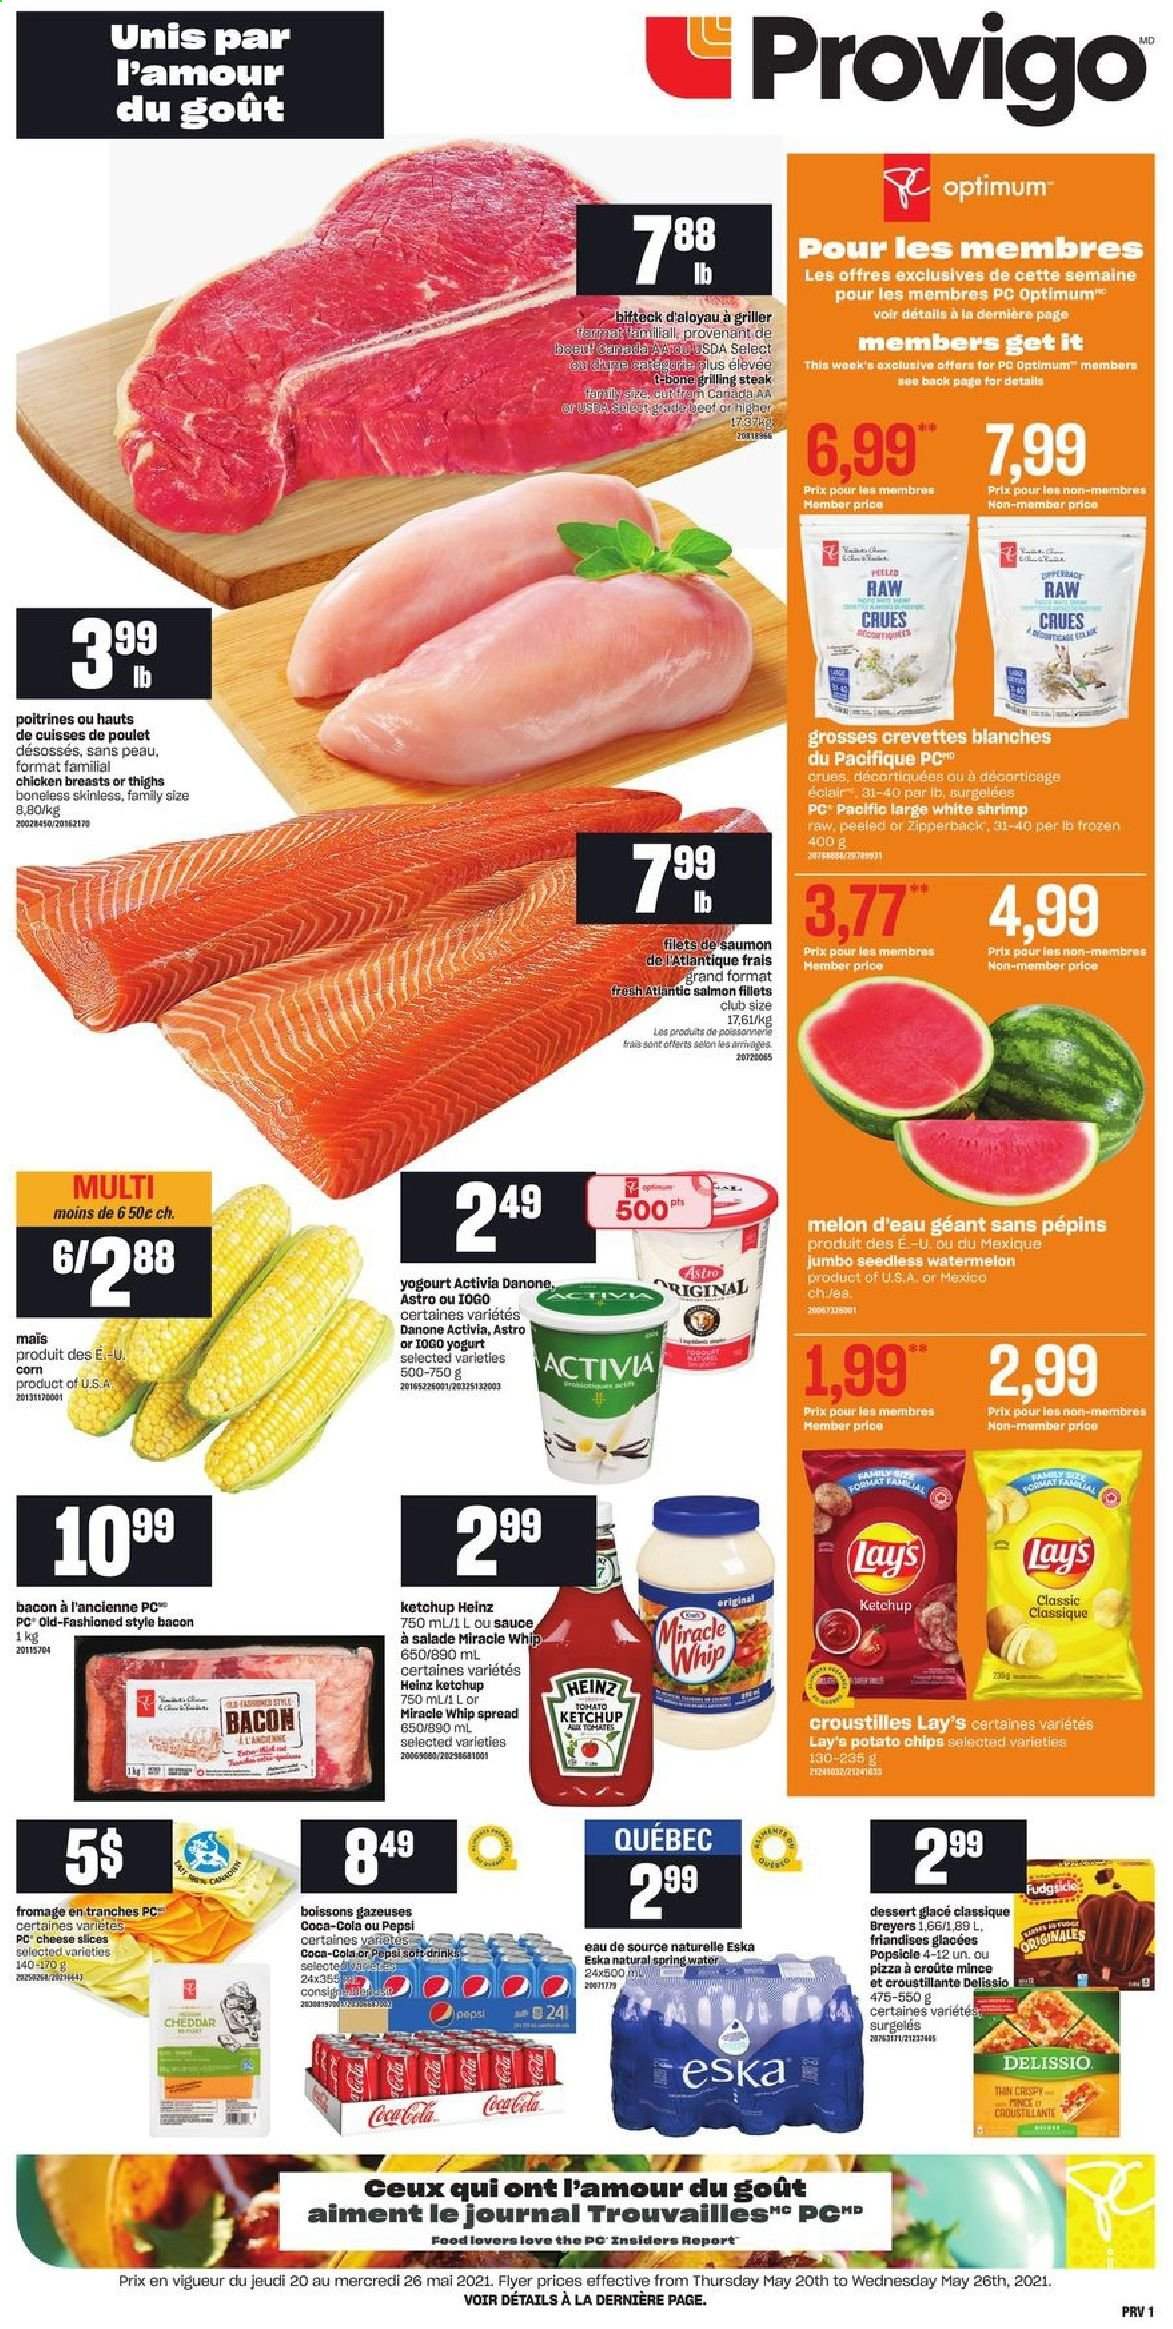 thumbnail - Provigo Flyer - May 20, 2021 - May 26, 2021 - Sales products - corn, watermelon, melons, shrimps, pizza, sauce, bacon, sliced cheese, yoghurt, Activia, Miracle Whip, potato chips, Lay’s, Heinz, Coca-Cola, Pepsi, soft drink, chicken breasts, beef meat, t-bone steak, Danone, steak. Page 1.